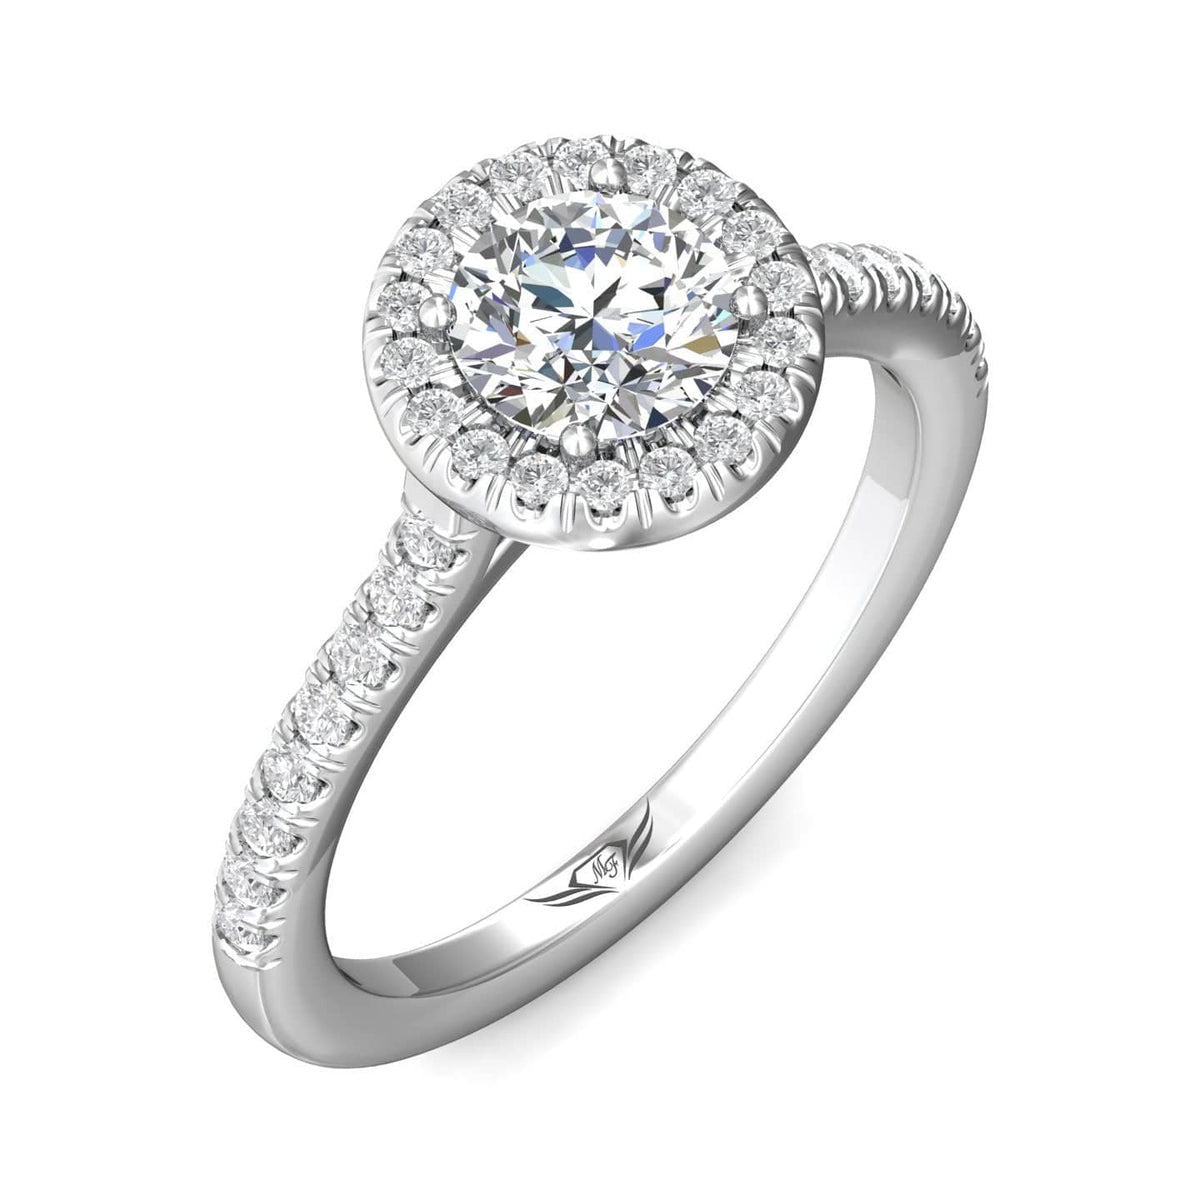 18K White Gold Diamond with Micro Pave Halo Engagement Ring